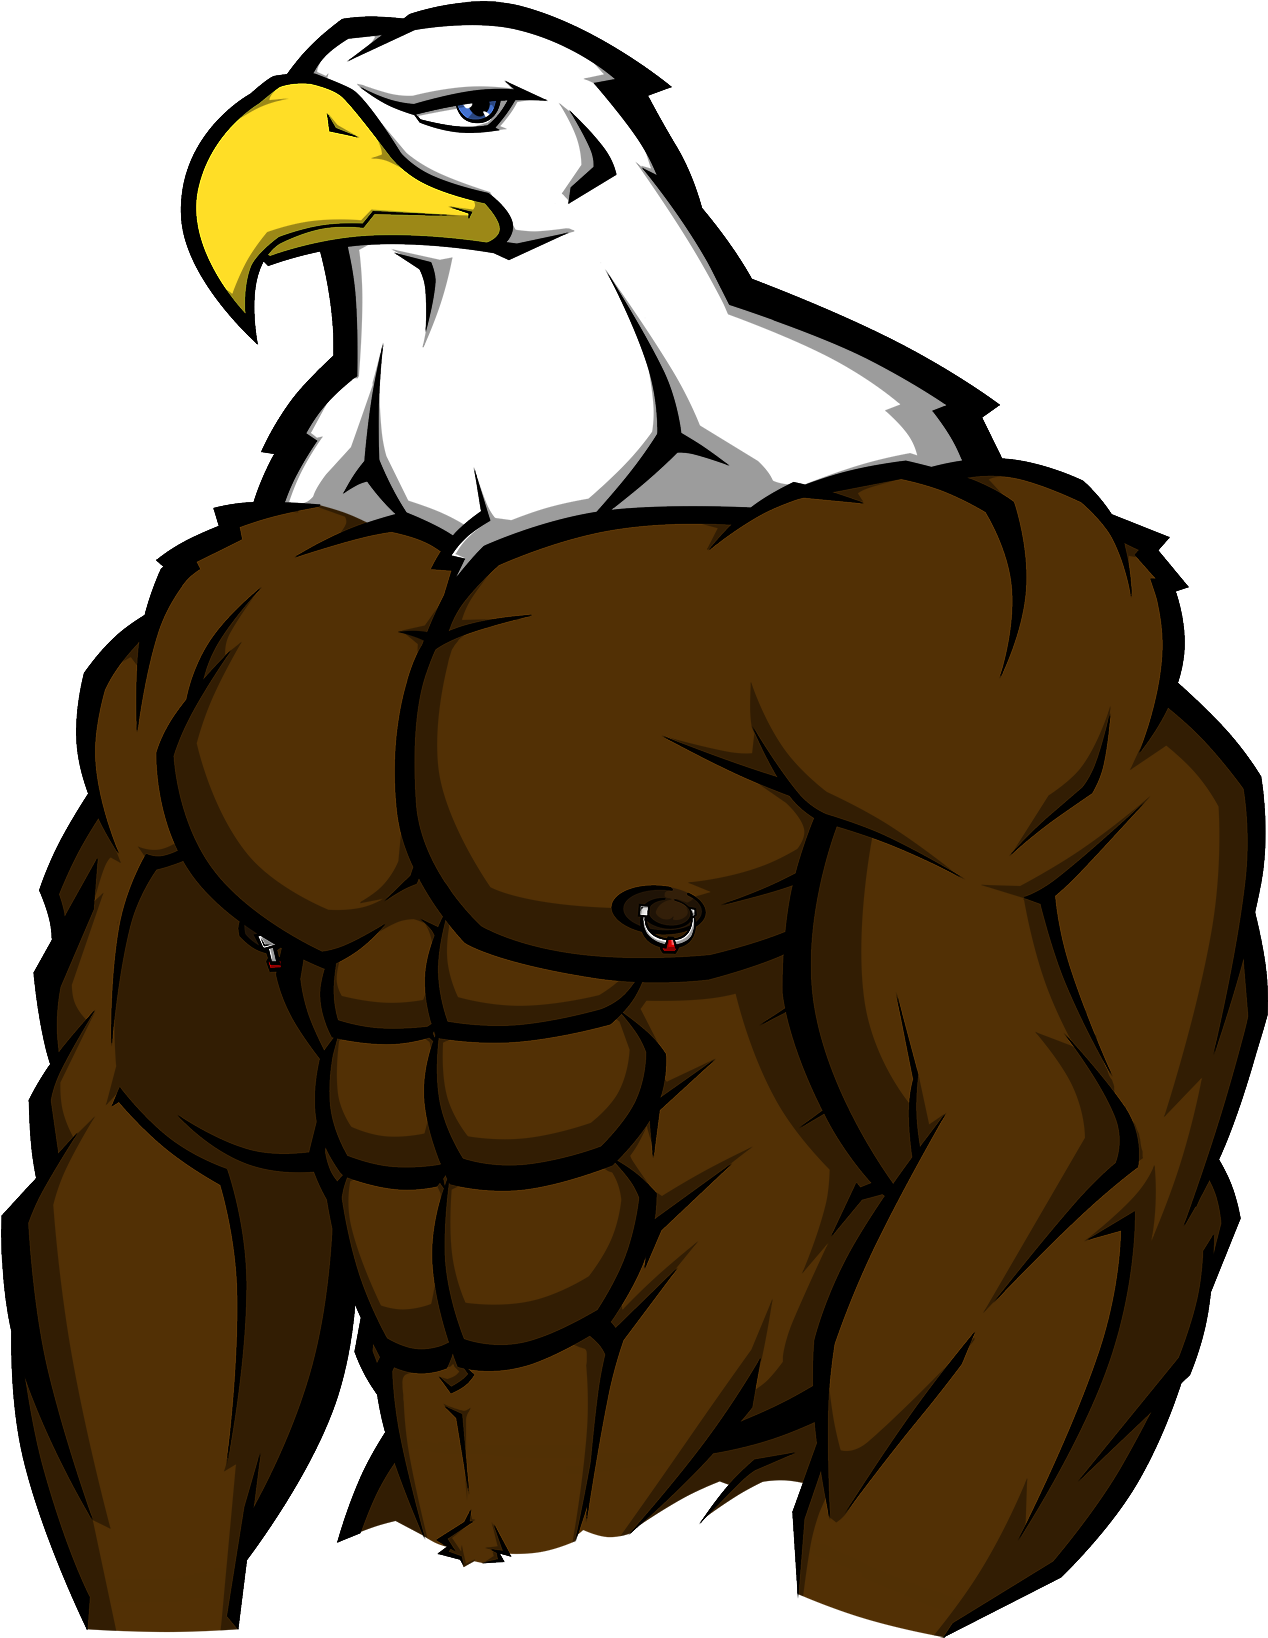 Muscle Bird Of Prey - Bald Eagle With Muscles (1581x1700)